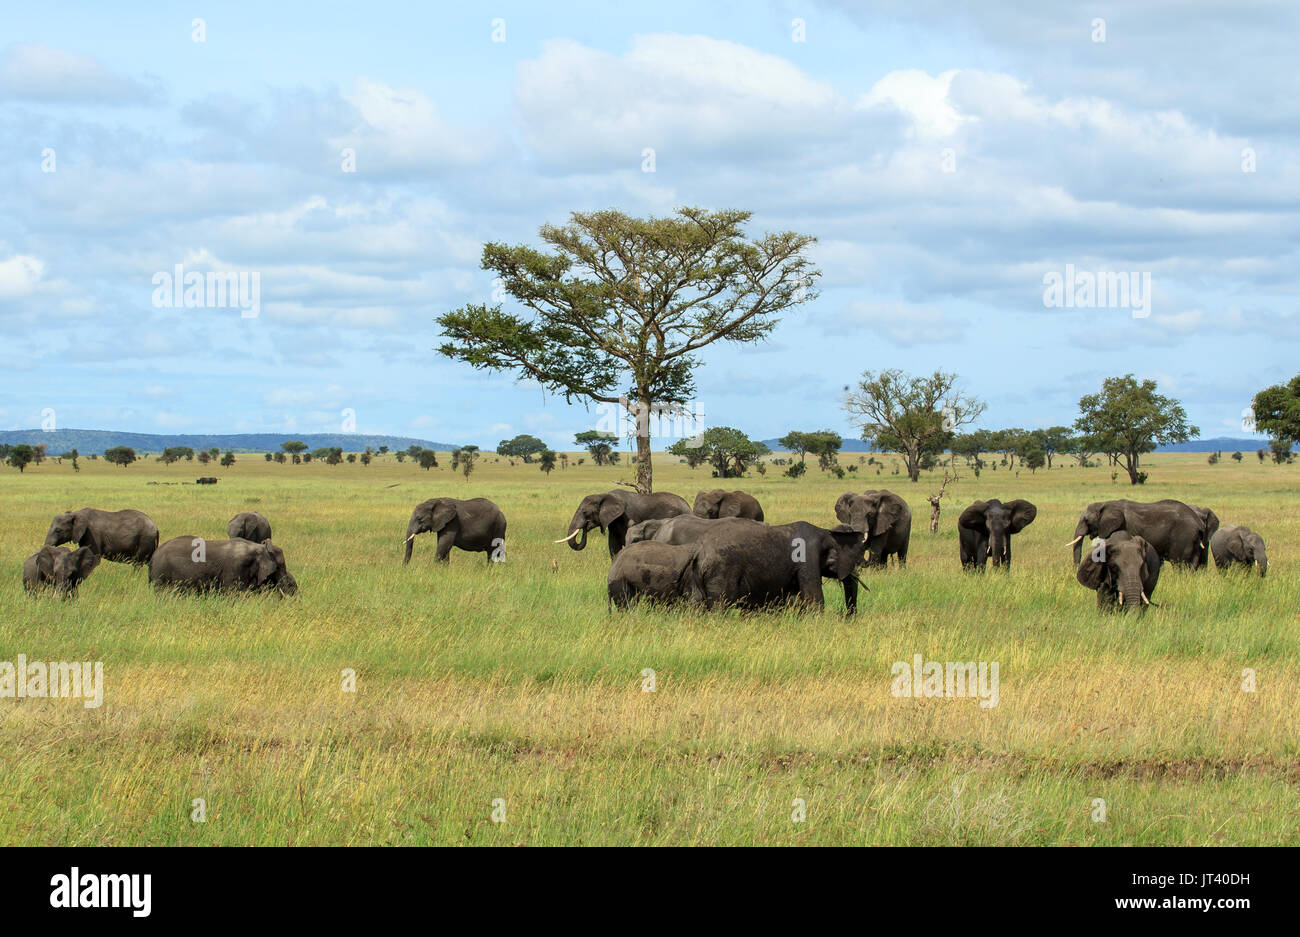 A herd of Elephants grazing in the grasslands of the Serengeti Stock Photo